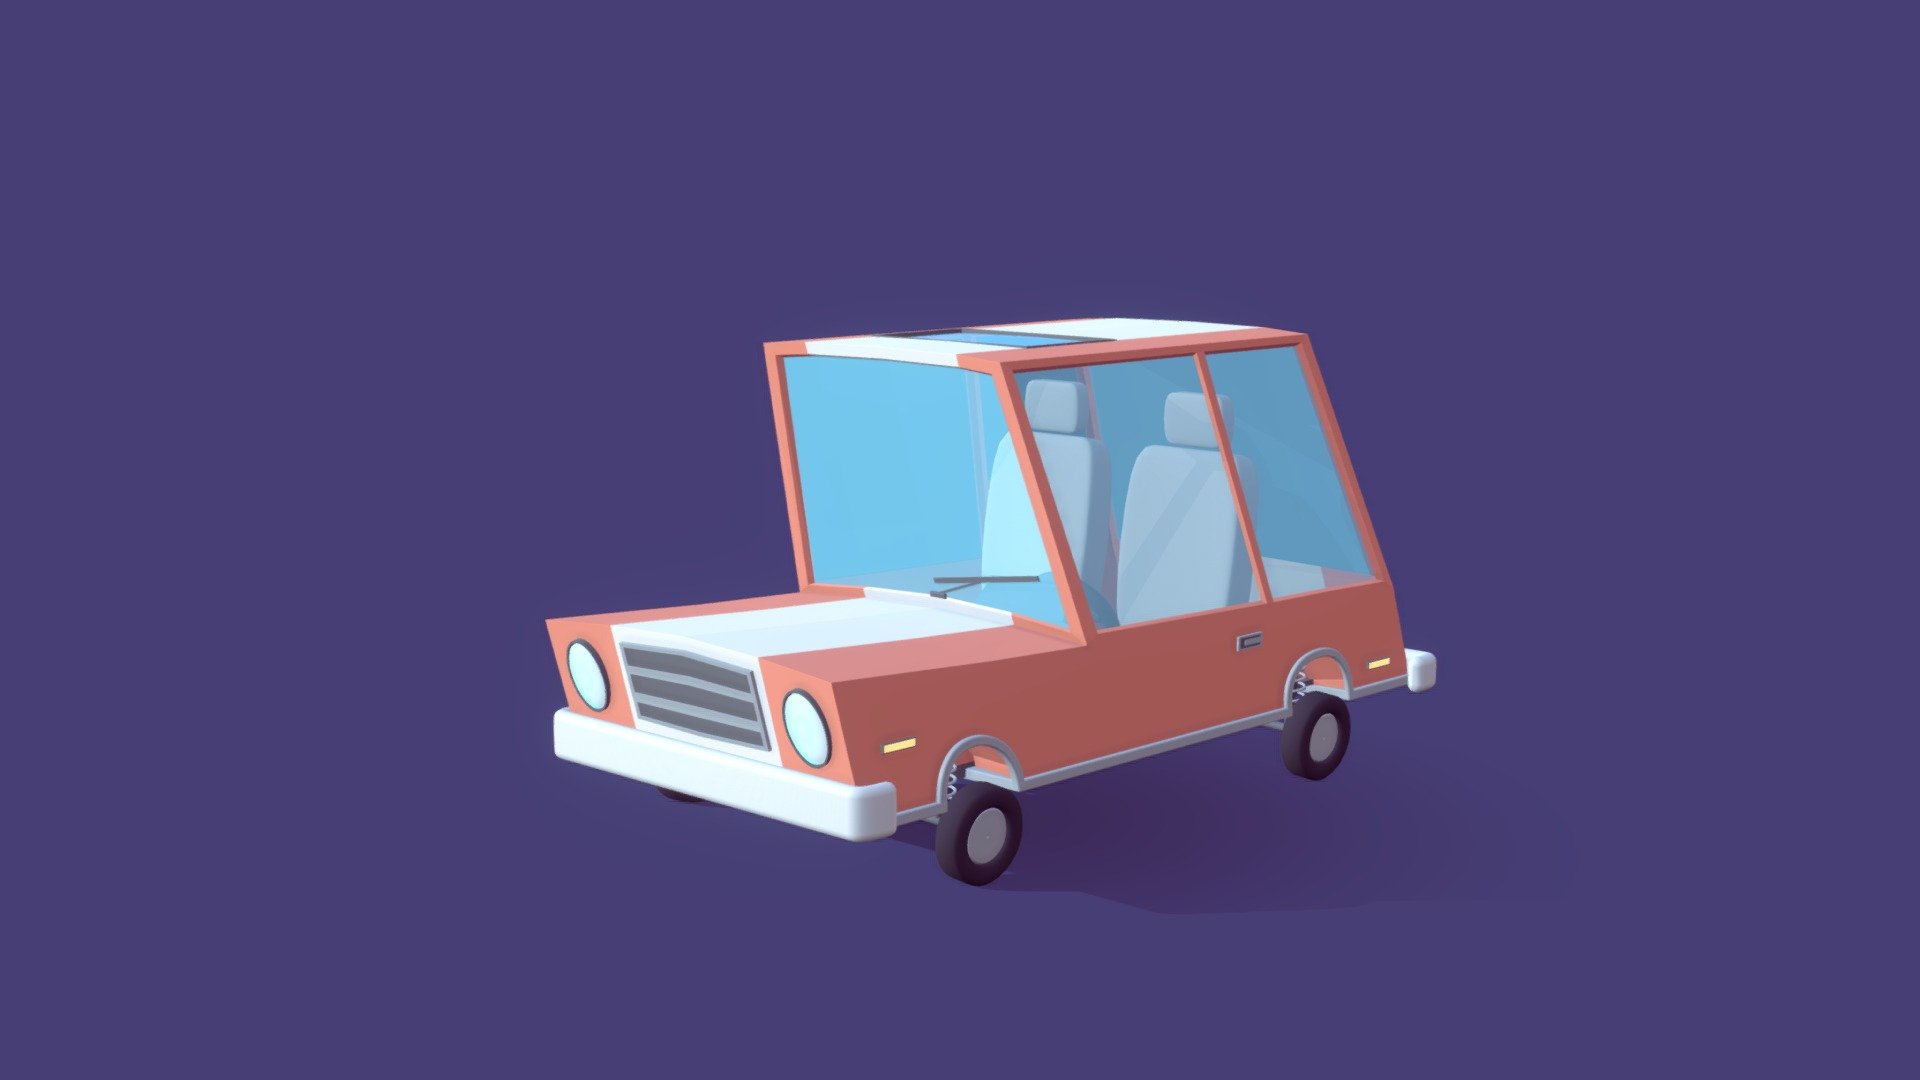 Created on Cinema 4d R17

Procedural textured

139 132 Polygons

Game Ready 

AR/VR Ready
 - Cartoon Low Poly Car Illustration - Buy Royalty Free 3D model by antonmoek 3d model